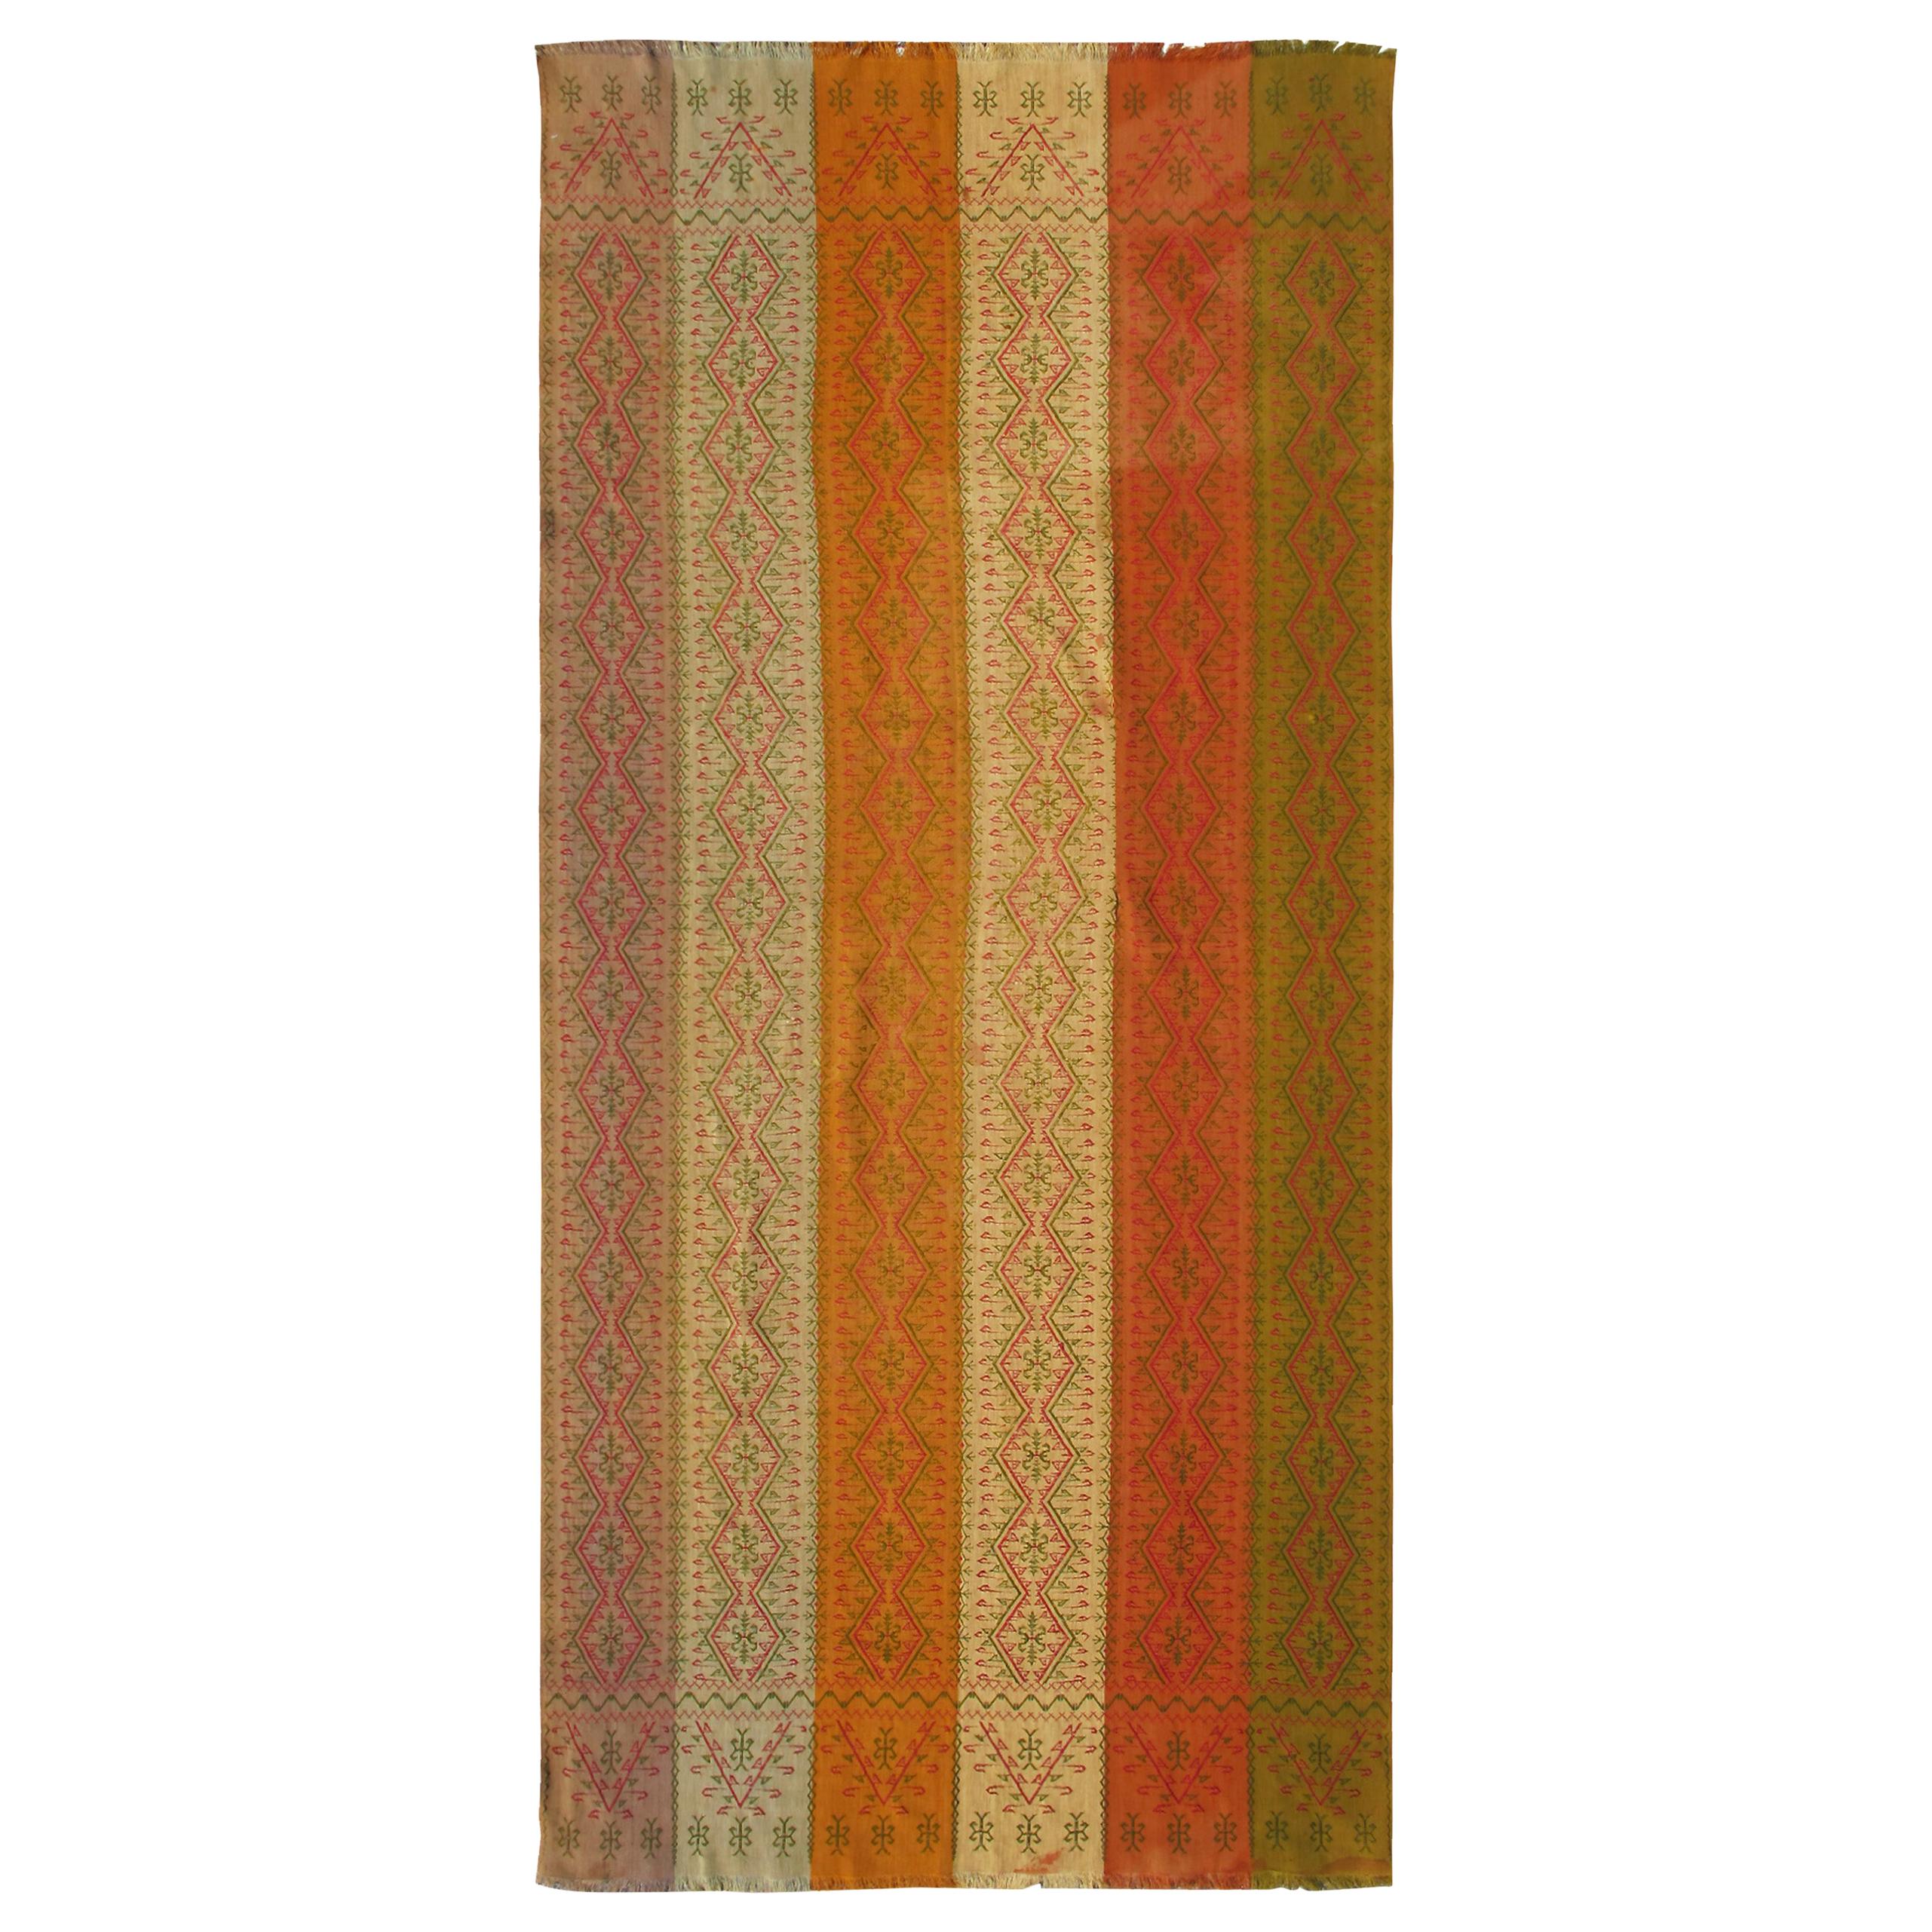 Colorful Antique  European Textile Tapestry in Vertical Stripes & Tribal Design